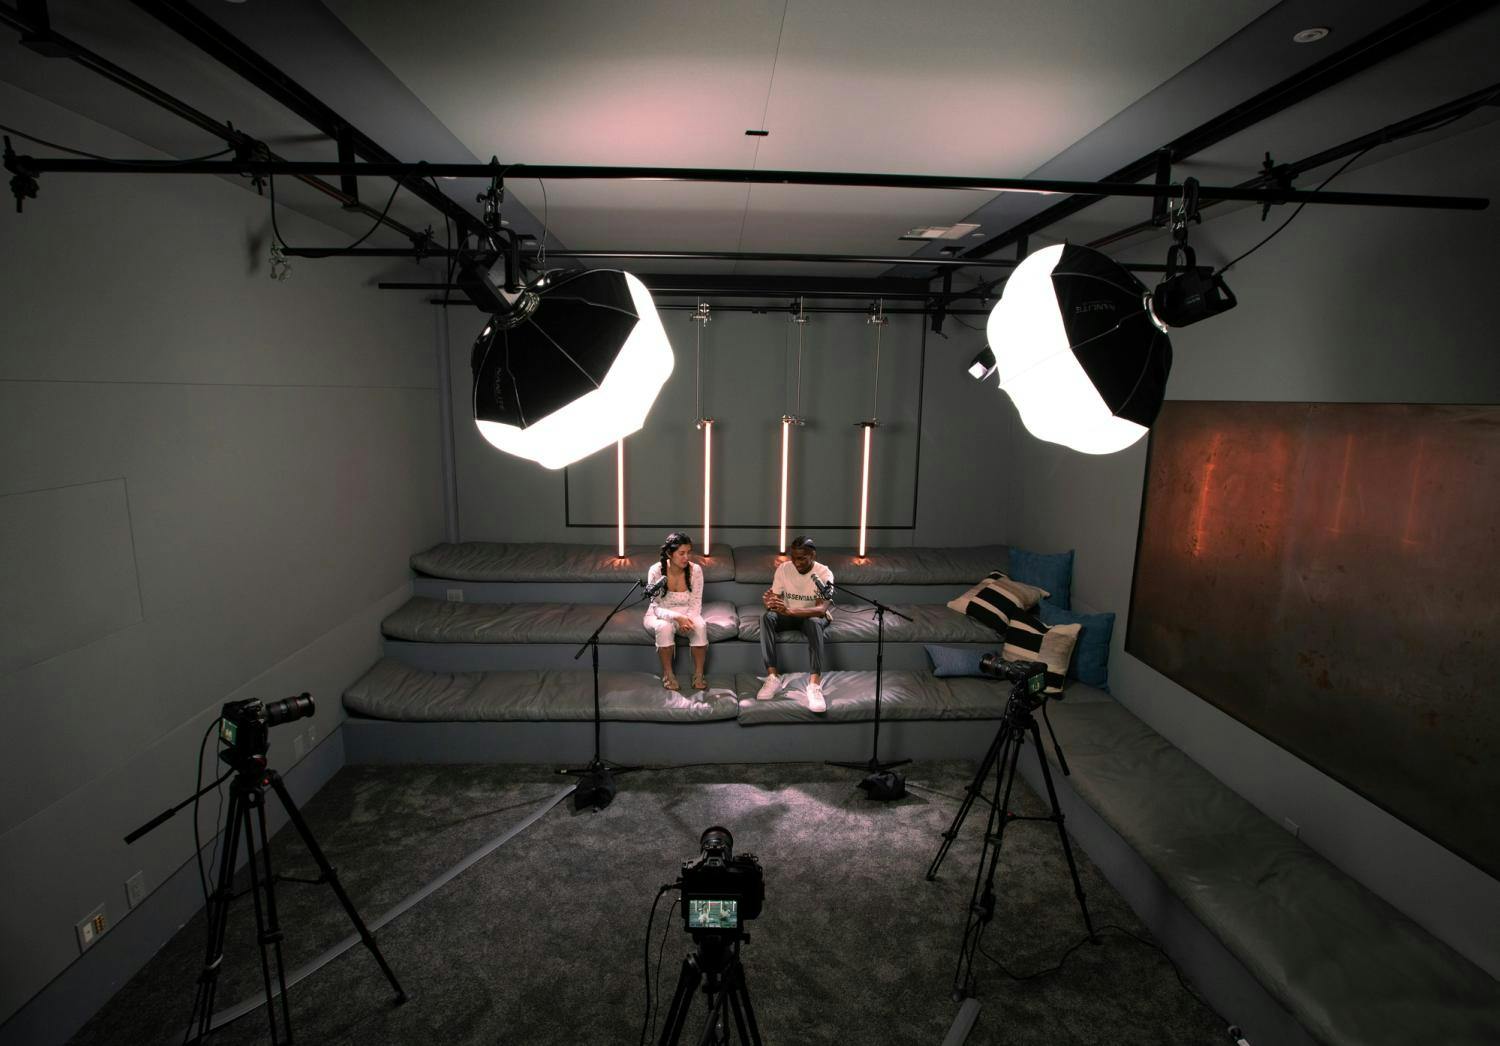 A top-down view of a professional studio setup, with a pair of interviewees sitting on a couch under studio lighting.